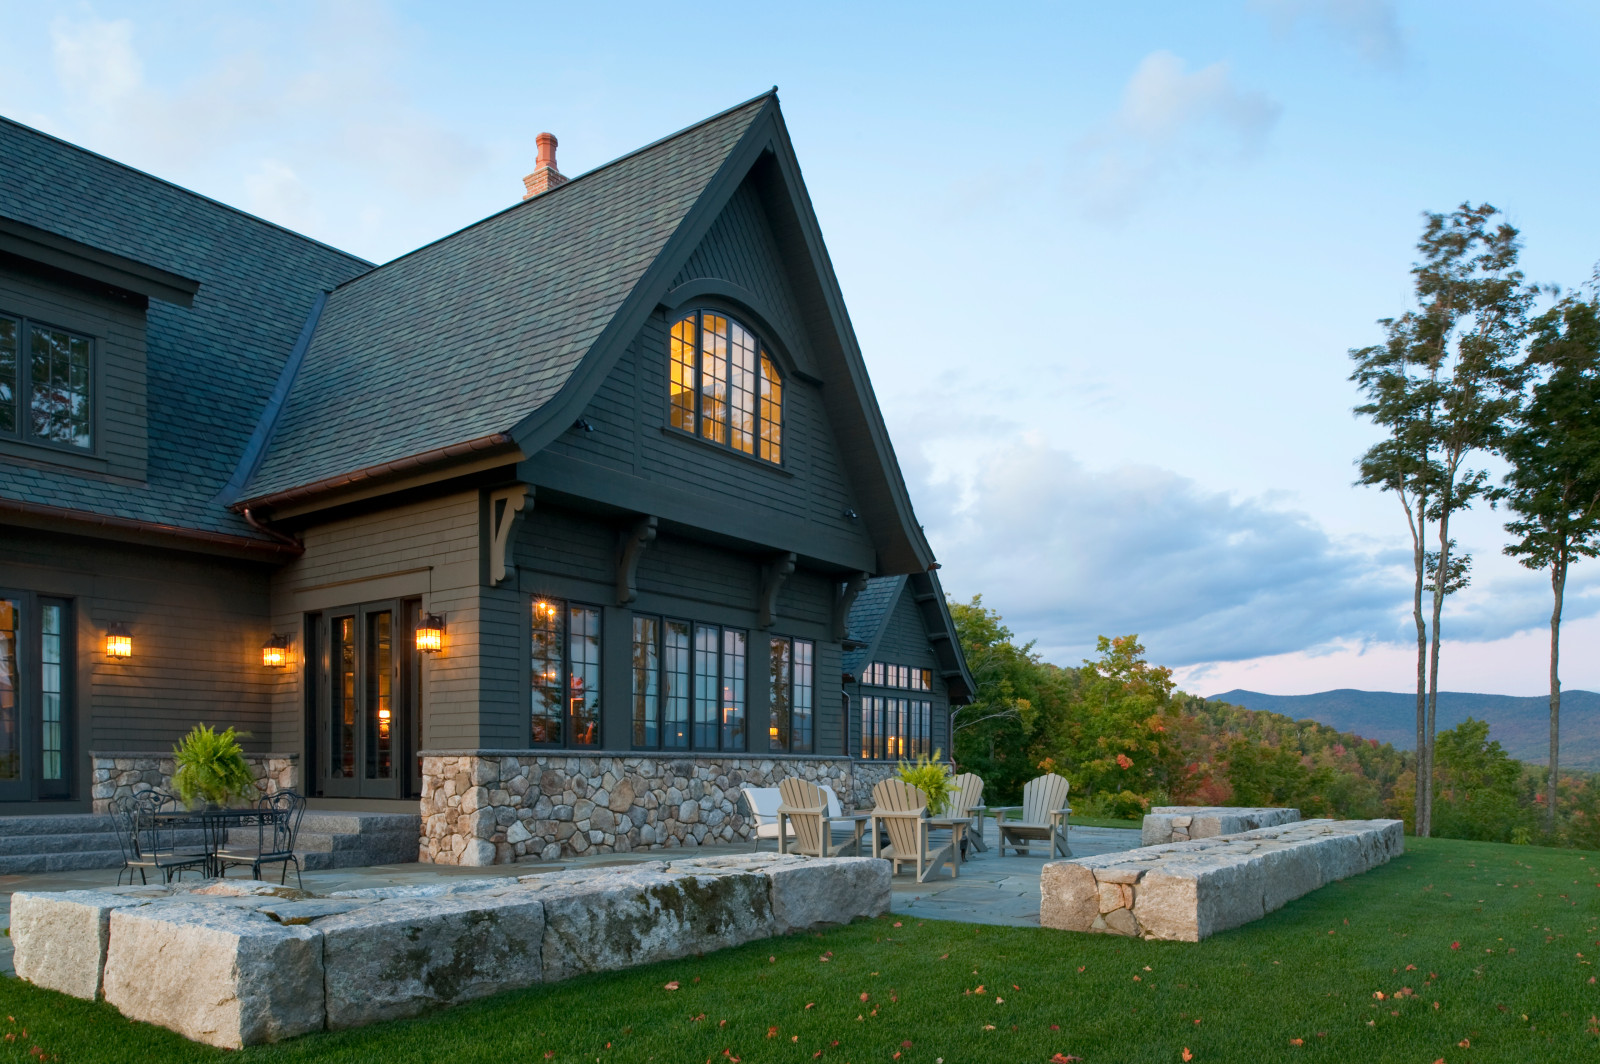 7 Most Recommended Exterior Paint Colors for Mountain Homes To Consider